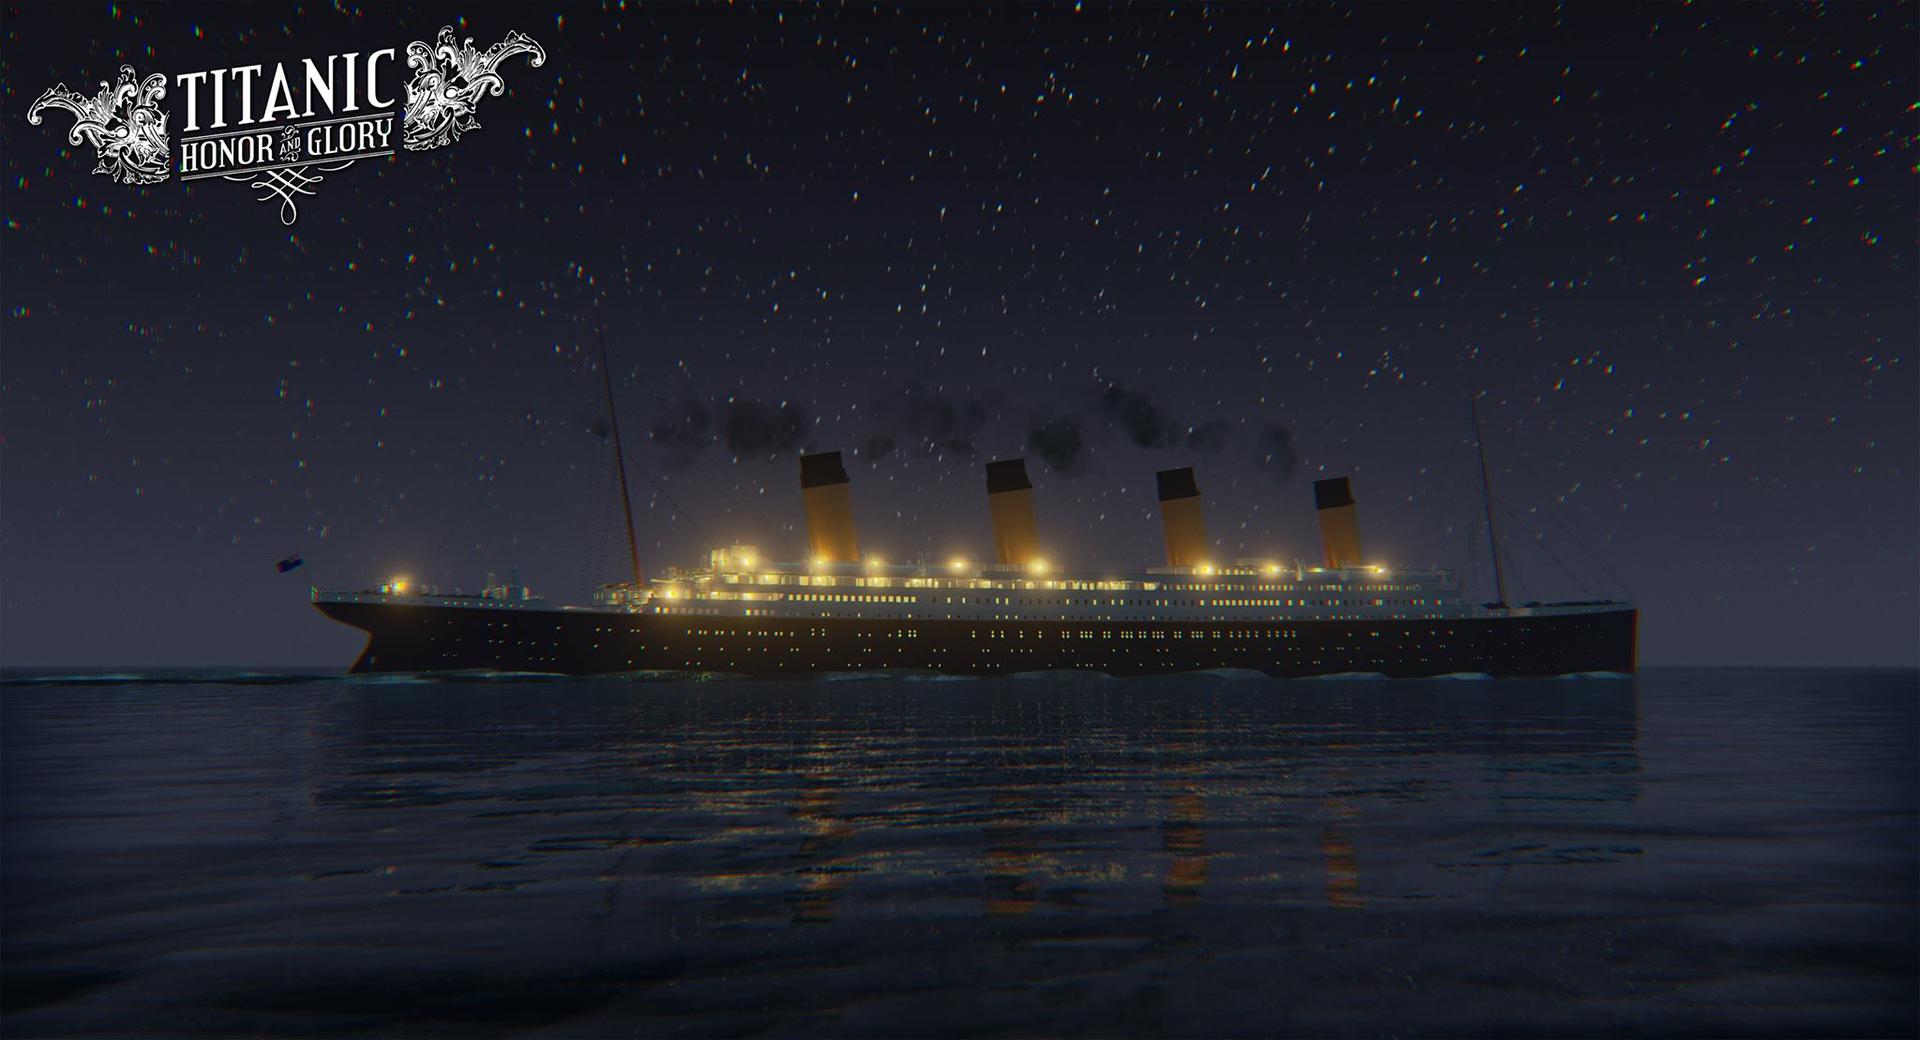 A shot of the Titanic from "Titanic: Honor and Glory"